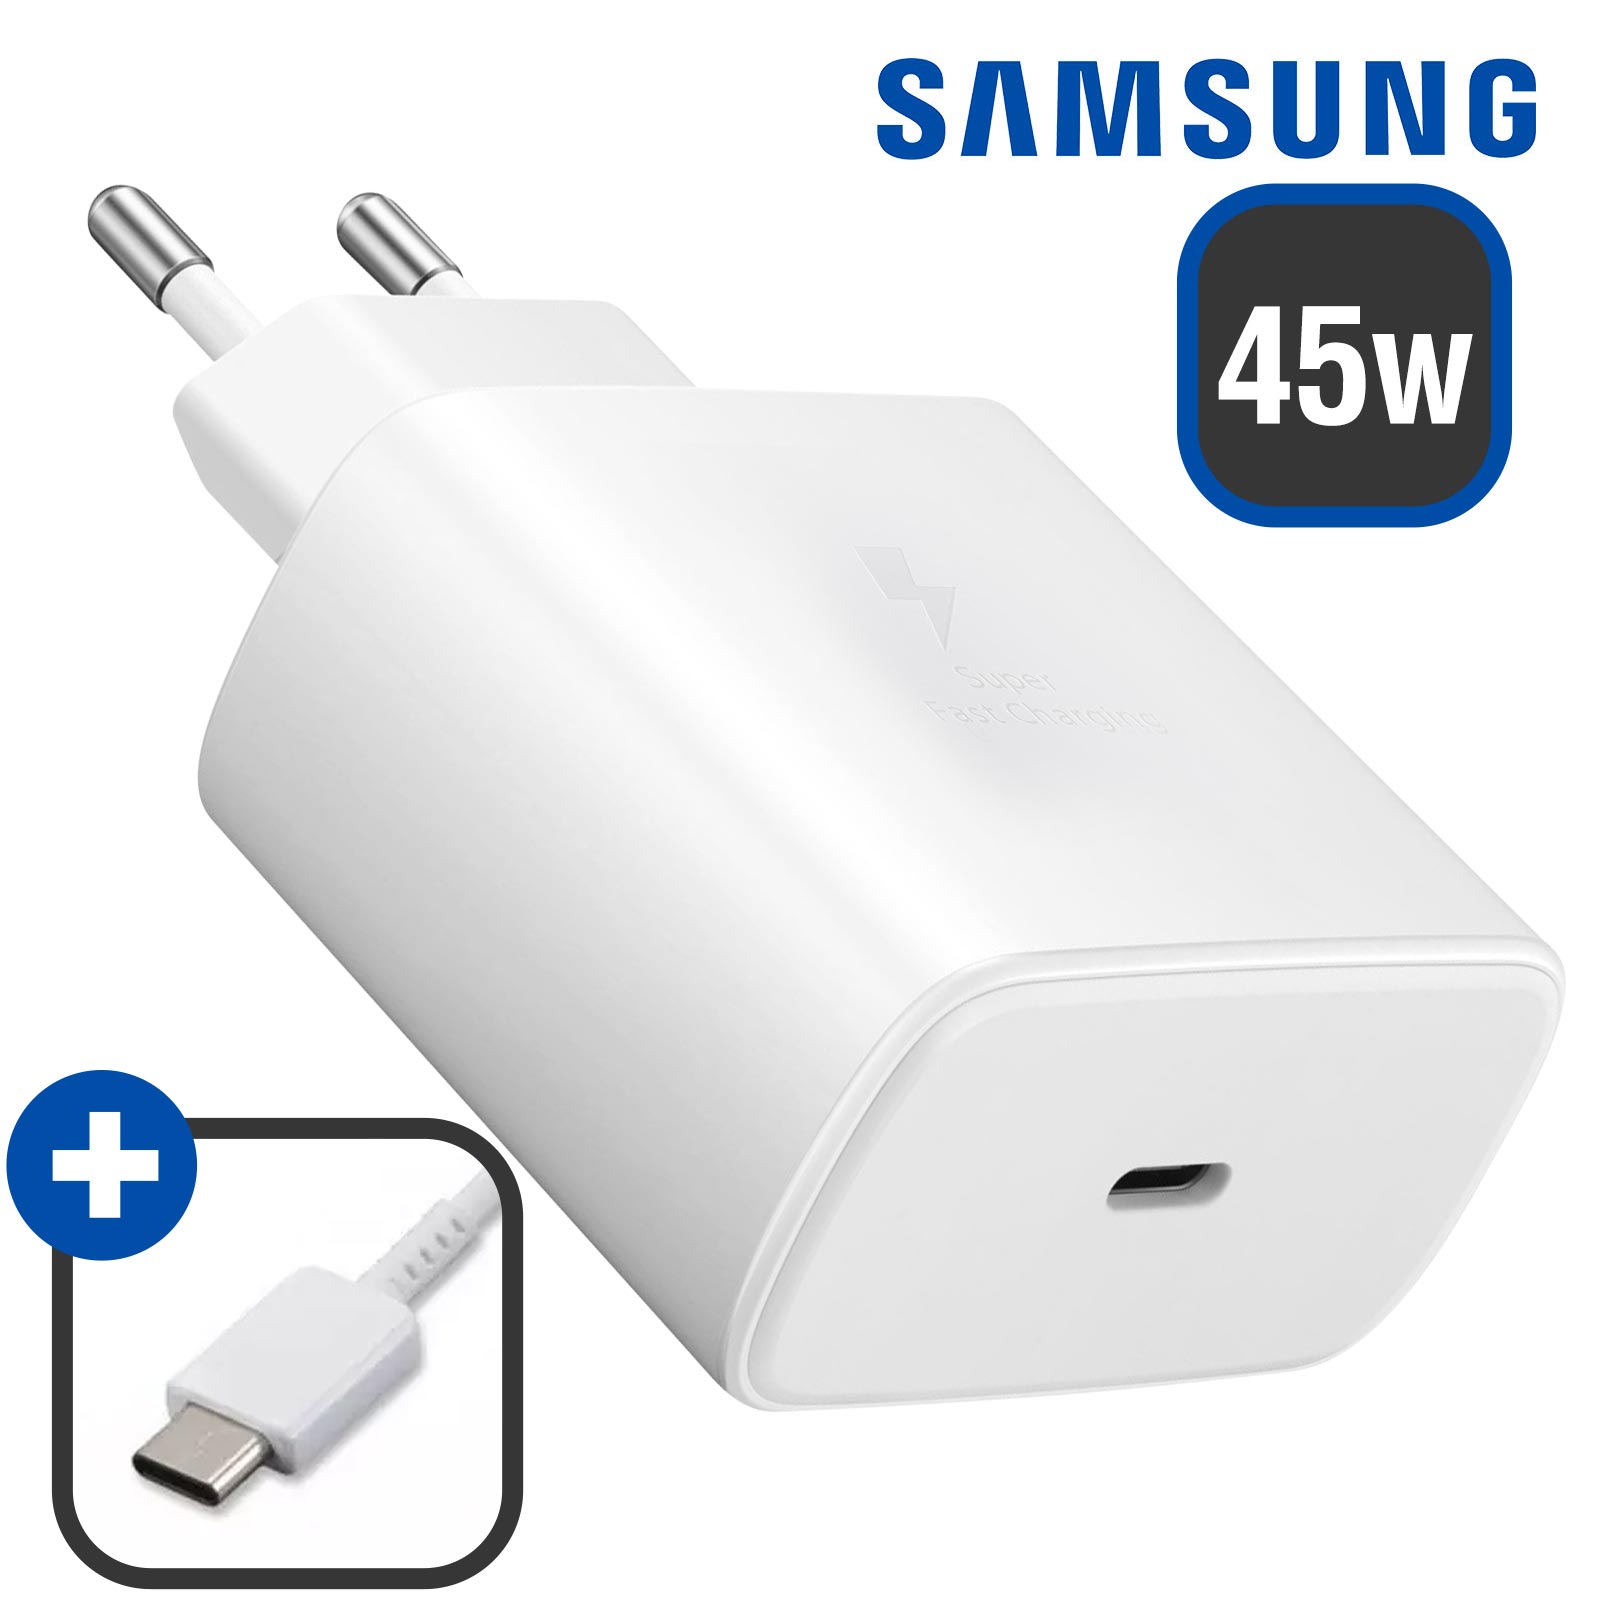 Chargeurs pour Samsung Galaxy S10